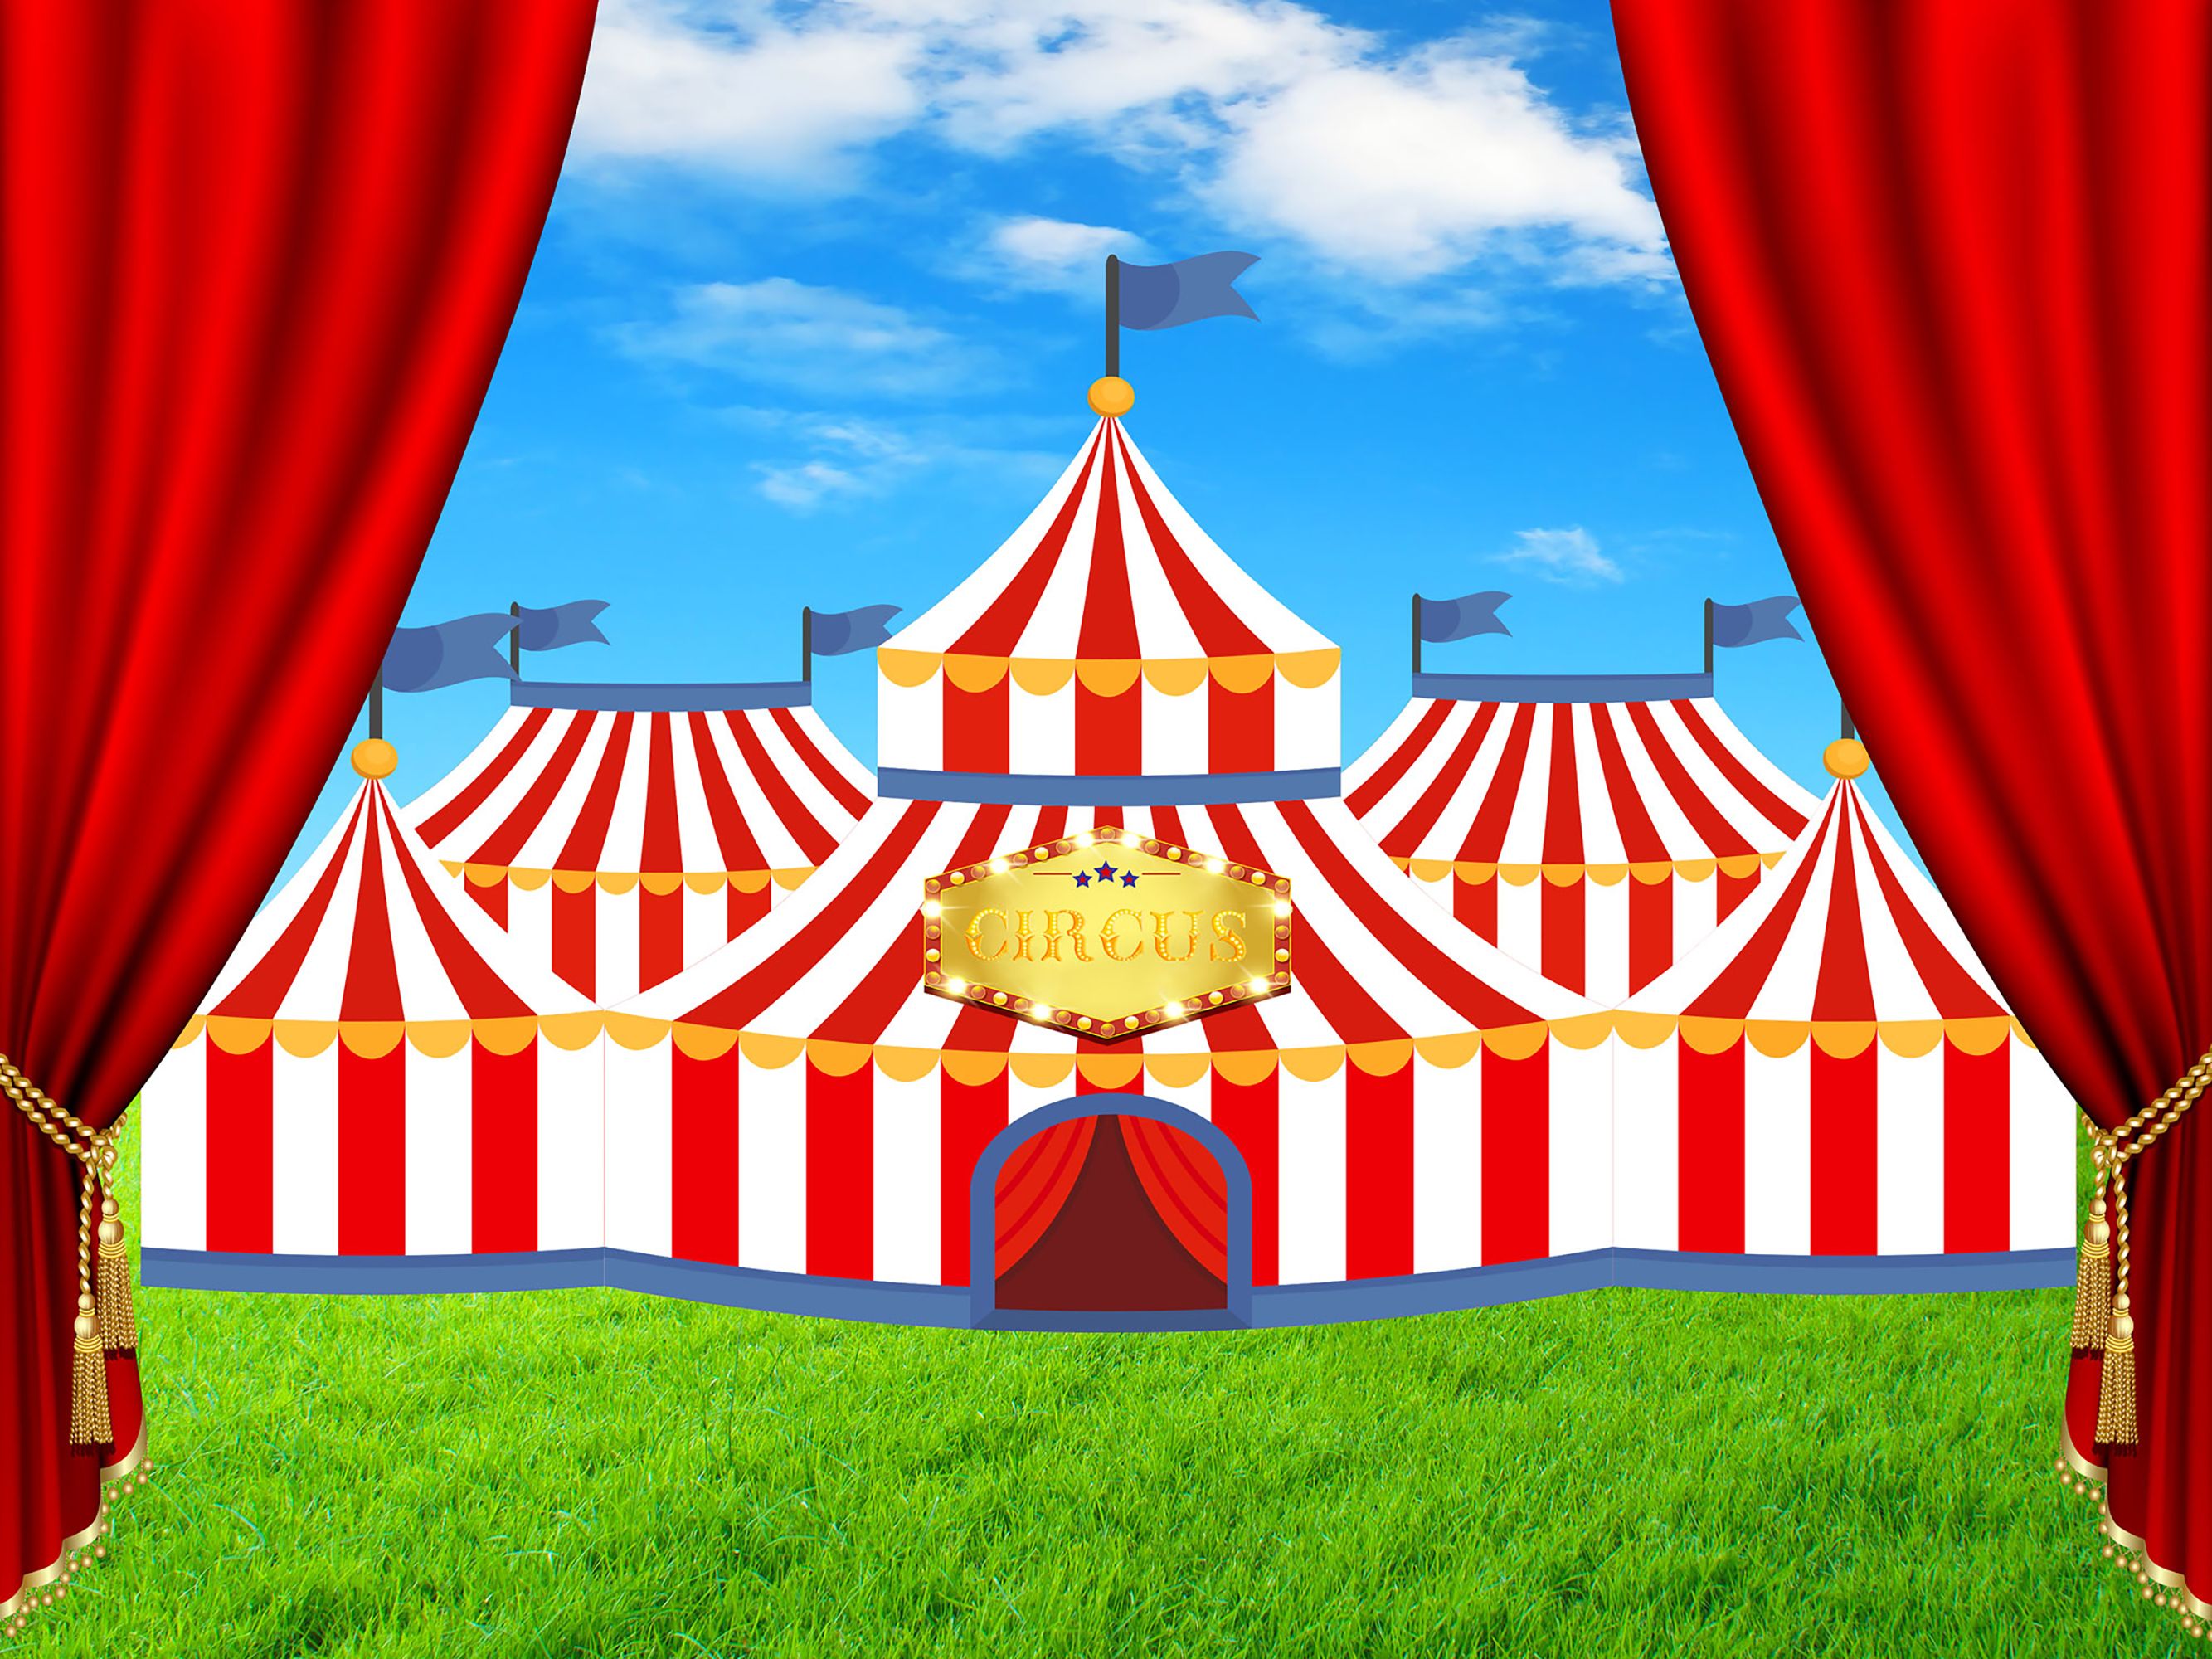 Carnival Circus Tent Red Curtain Vinyl Photography Backdrops White Clouds Green Grass Photo Booth Backgrounds For Children Birthday Studi